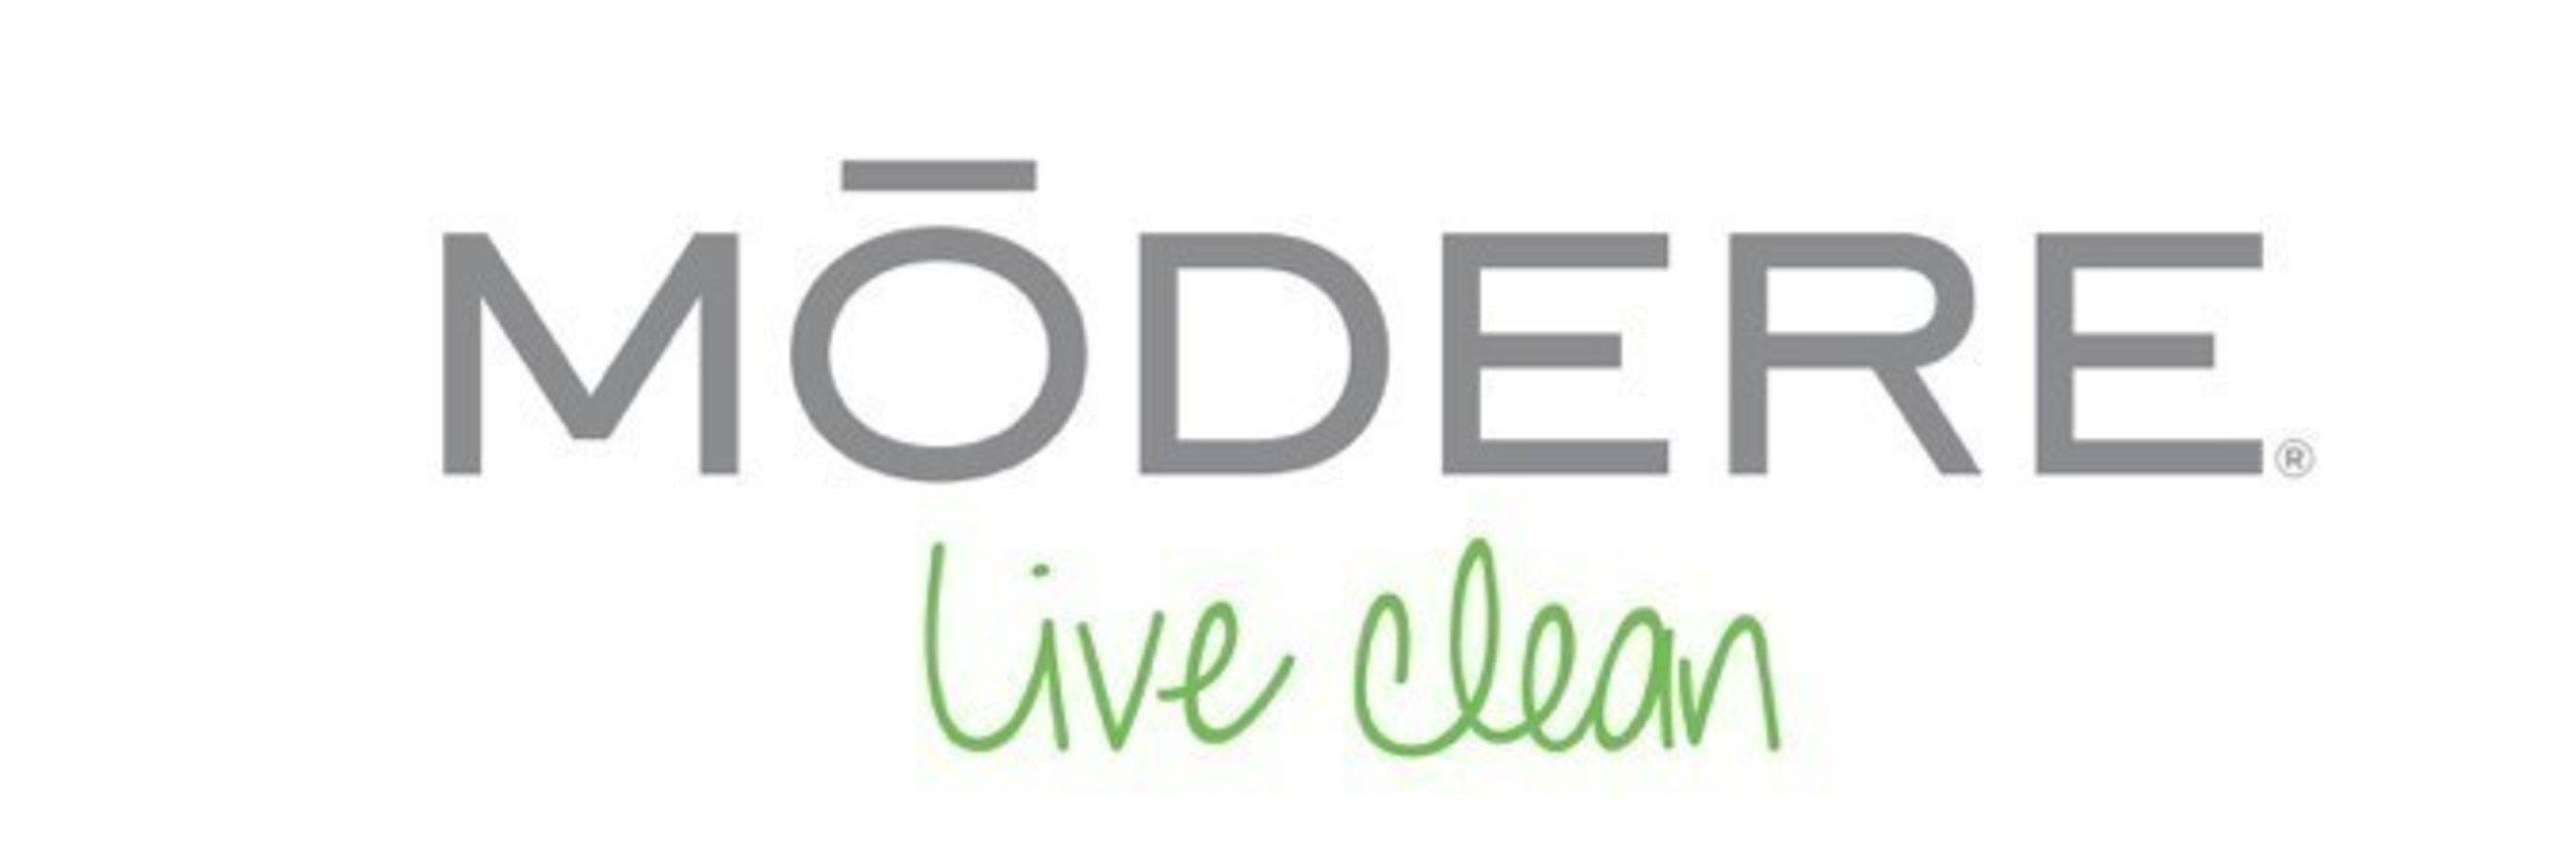 Modere Logo - Local Office Celebrates Eco Conscious Initiatives At Grand Opening